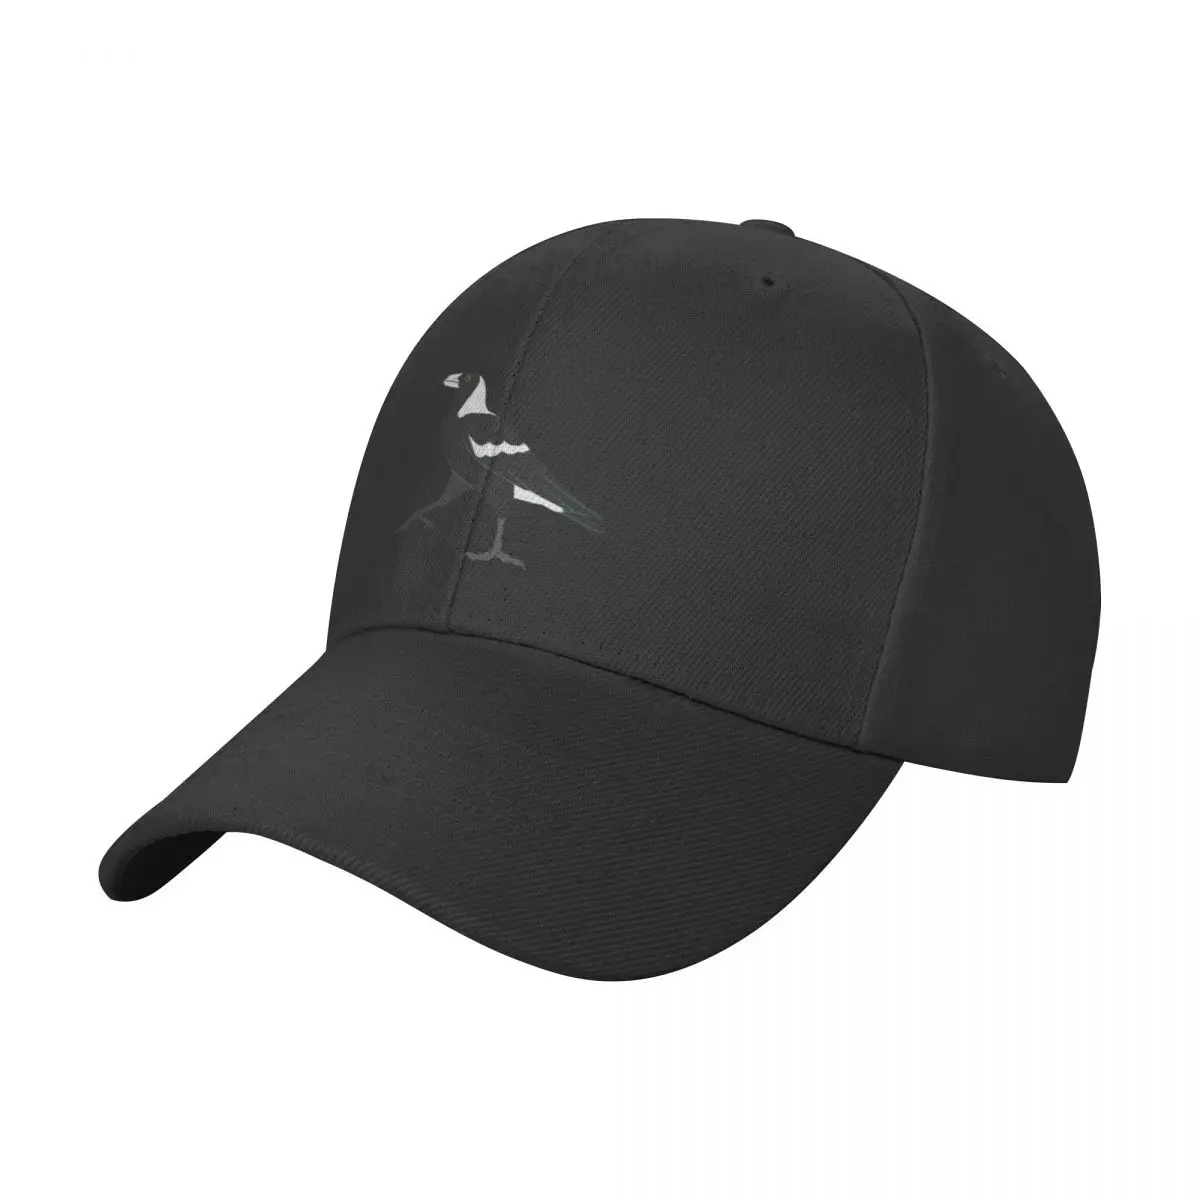 

Magpie March Baseball Cap Military Tactical Caps Rave New In The Hat Sunscreen Golf Hat Women Men's